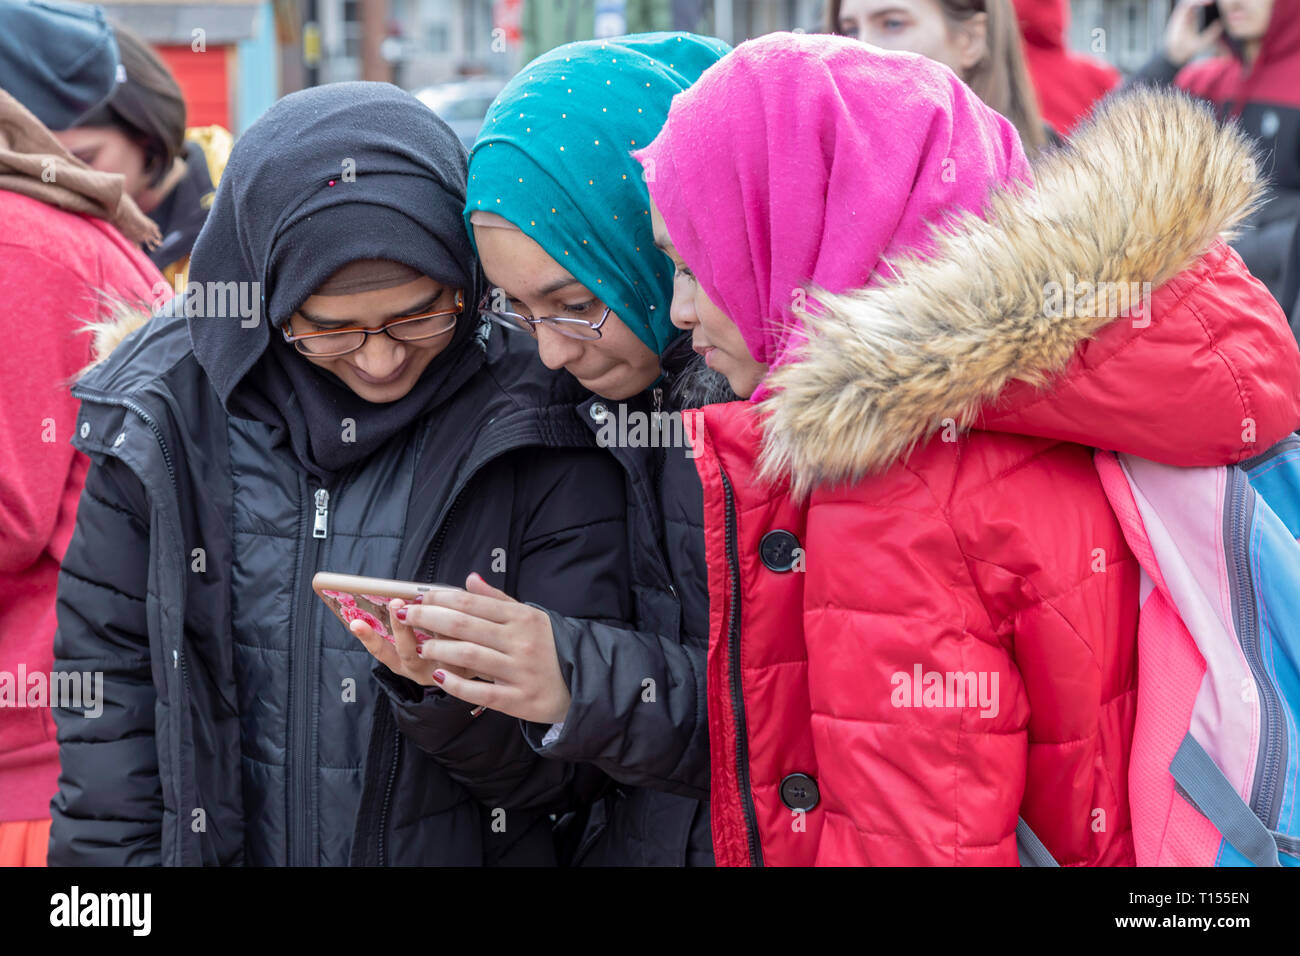 Hamtramck, Michigan - Muslim school girls study a cell phone. Hamtramck has always been a city of immigrants, most recently from Muslim countries. Ove Stock Photo